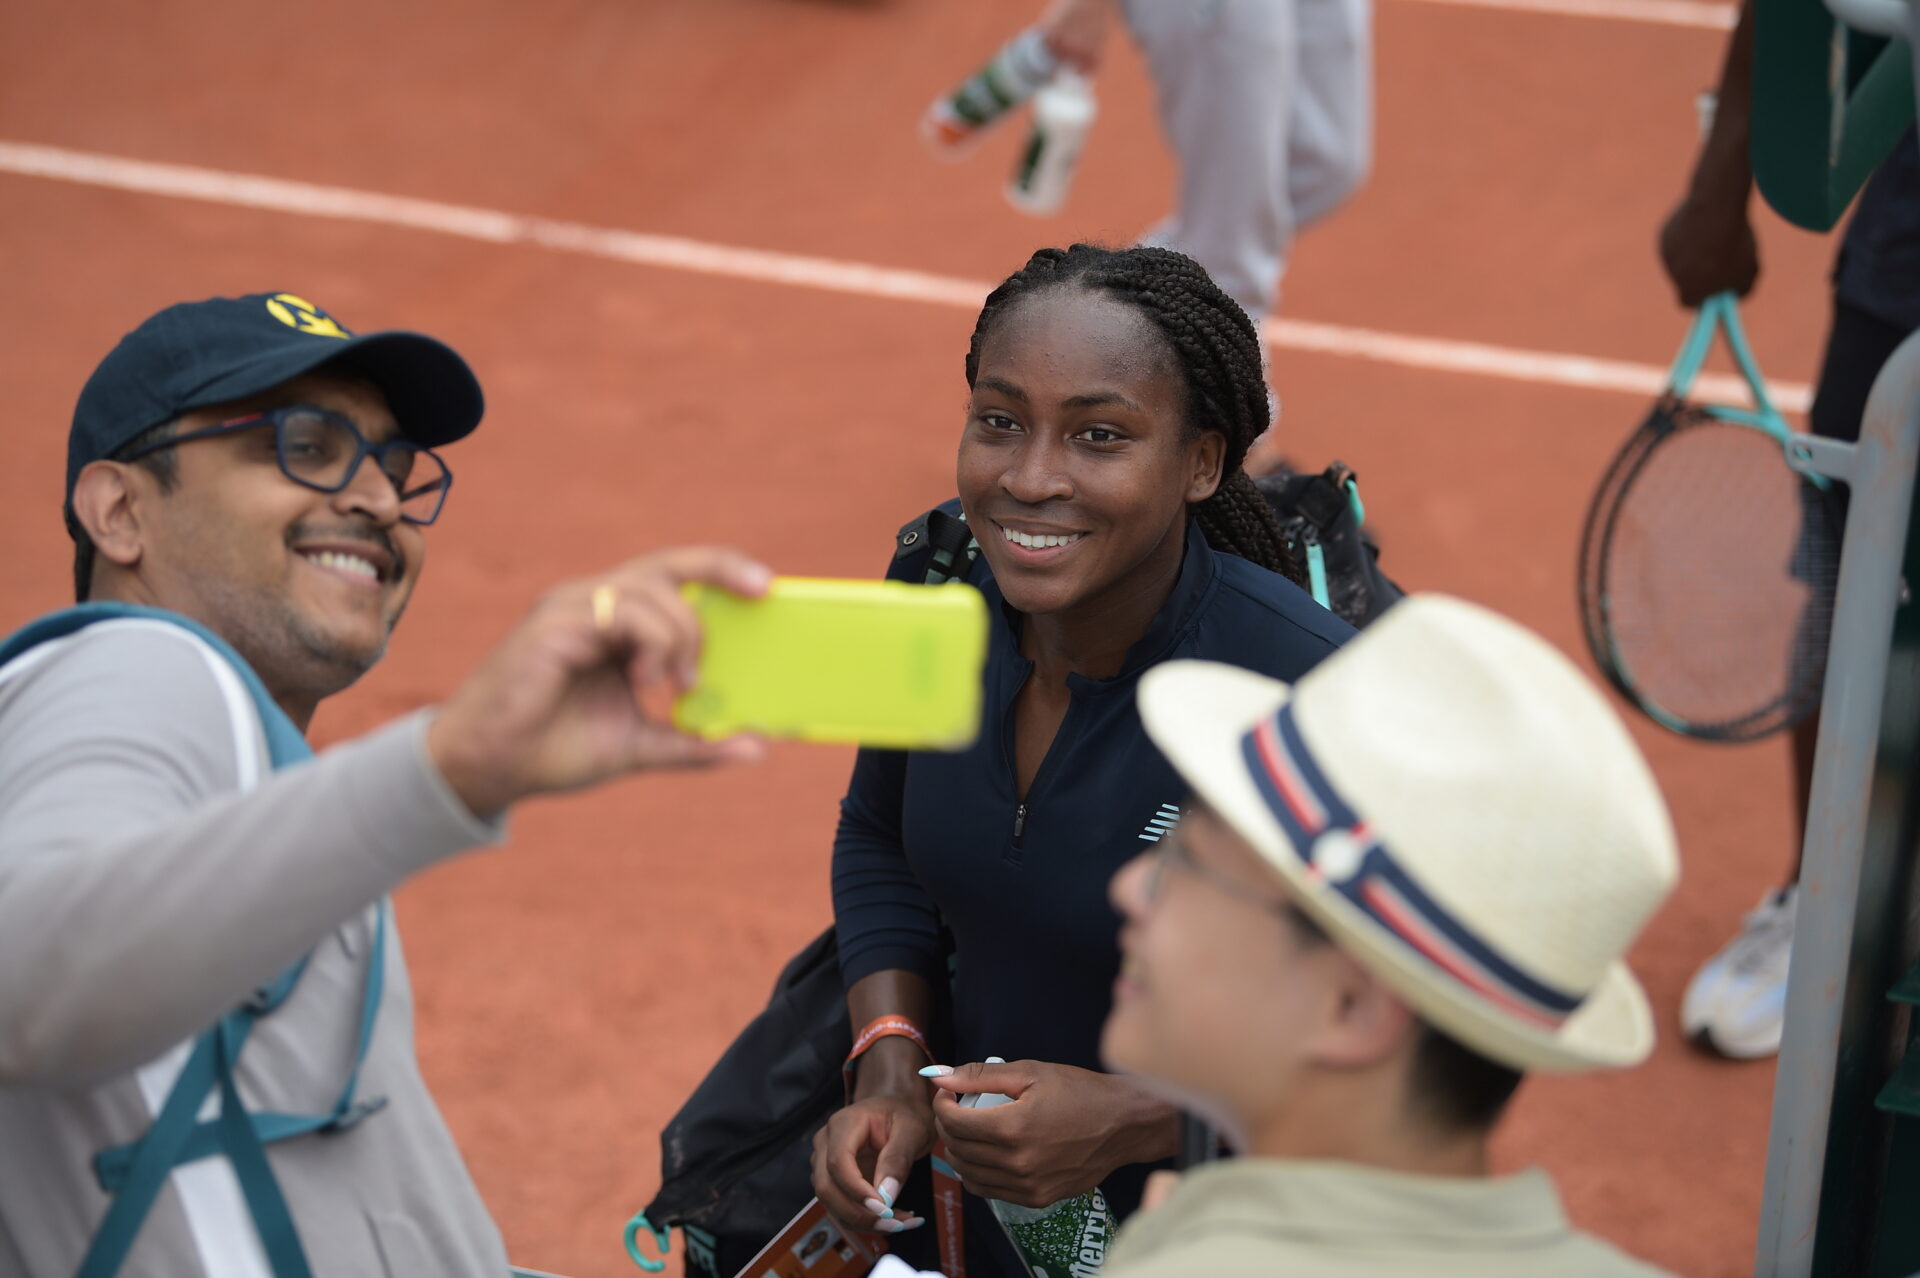 Roland-Garros helps its athletes fight hate on social media